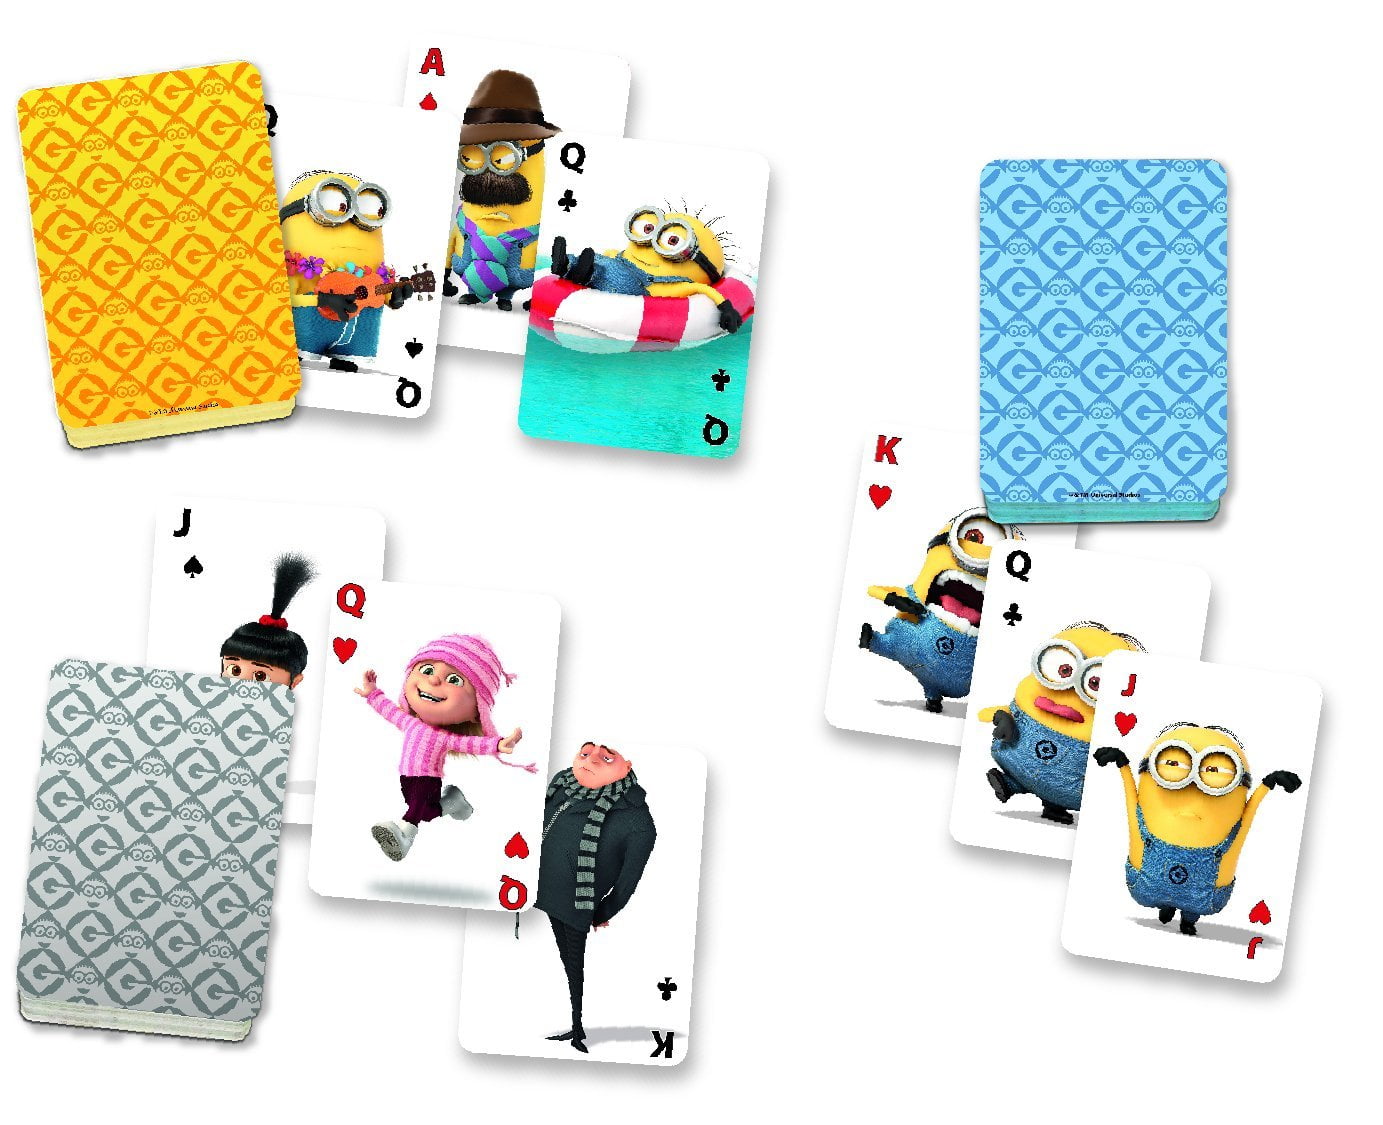 New Cardinal Universal Despicable Me Playing Cards Deck 